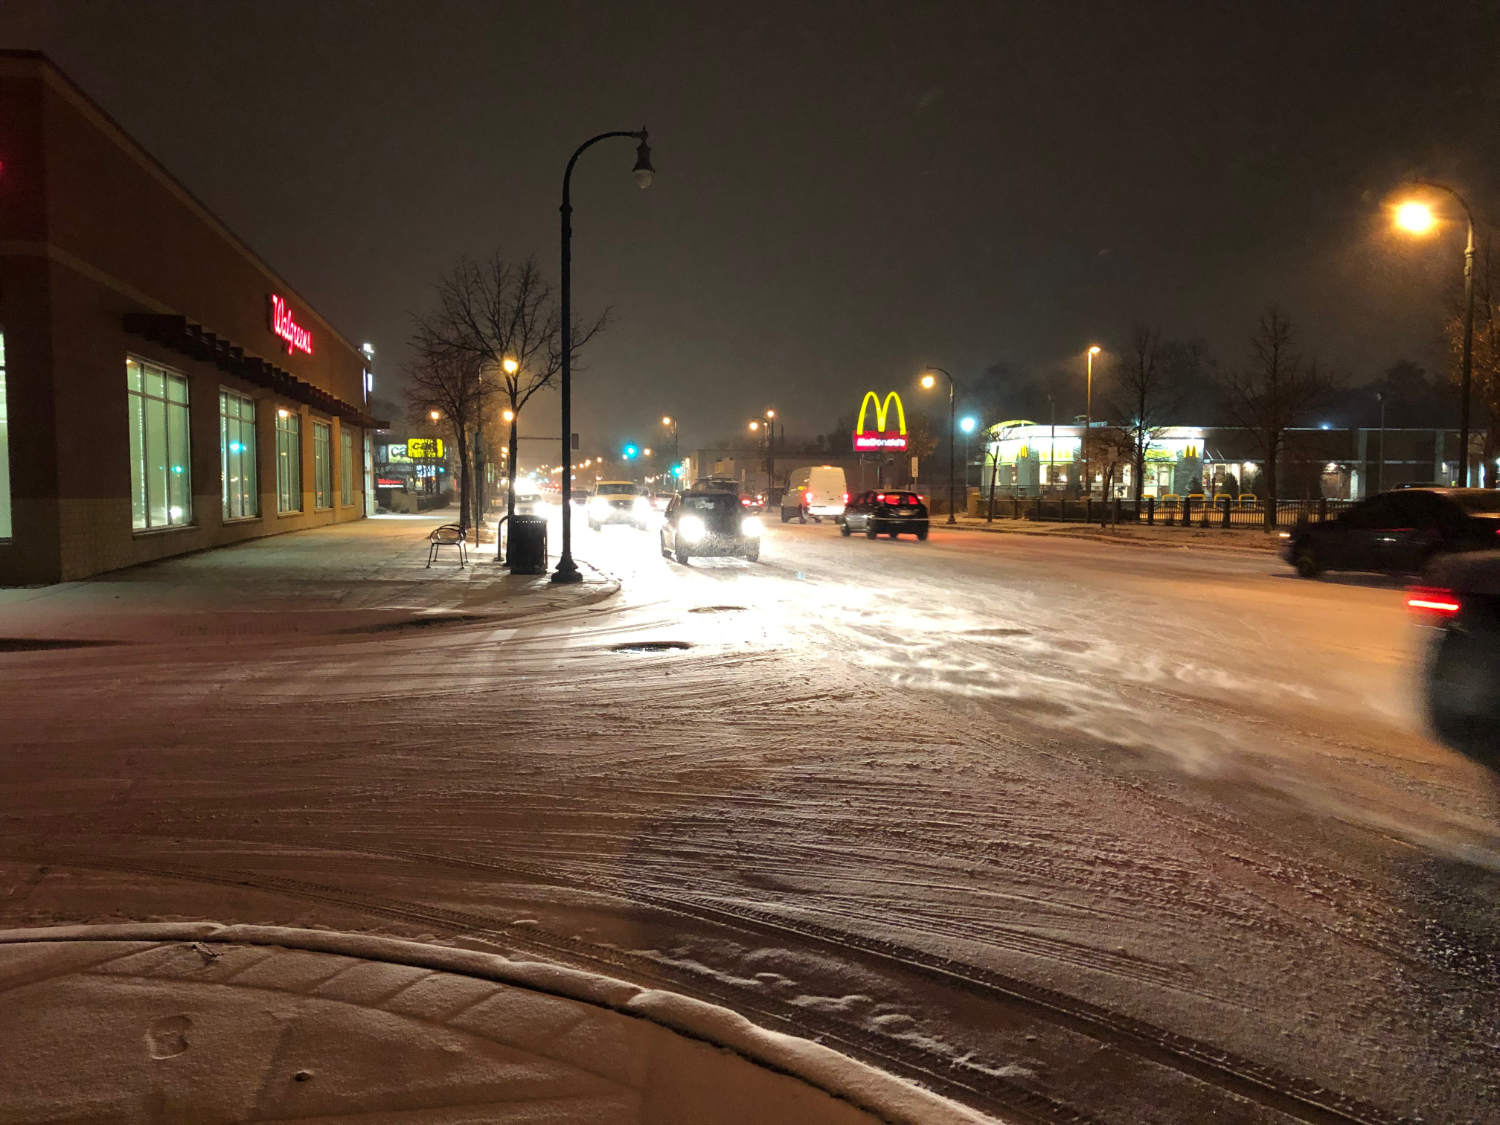 snowy scene of cars on street with Walgreens and McDonalds signs at night